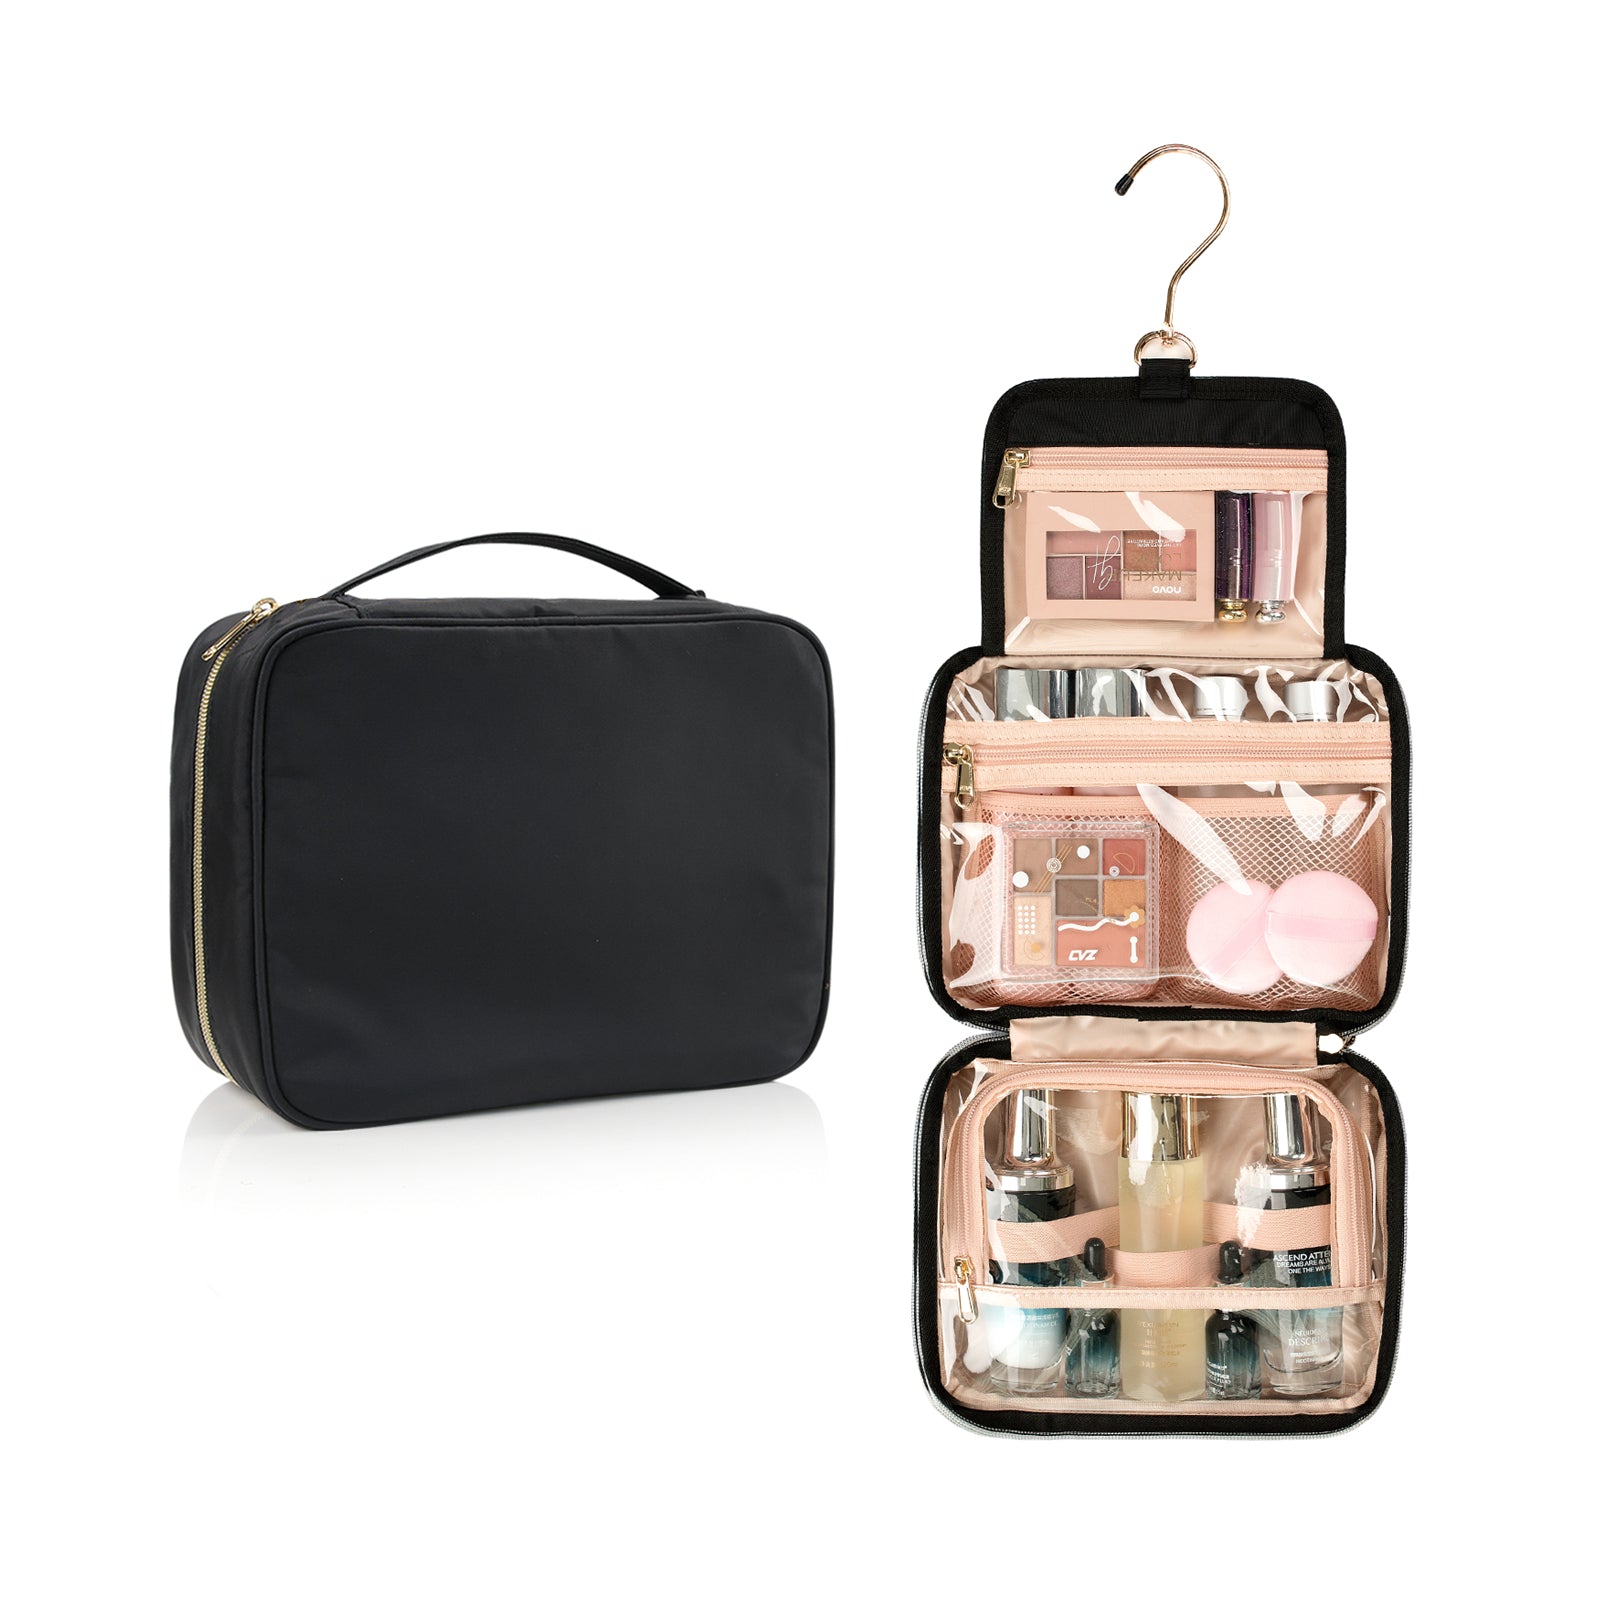 Relavel Travel Toiletry Bag – Relavelbags